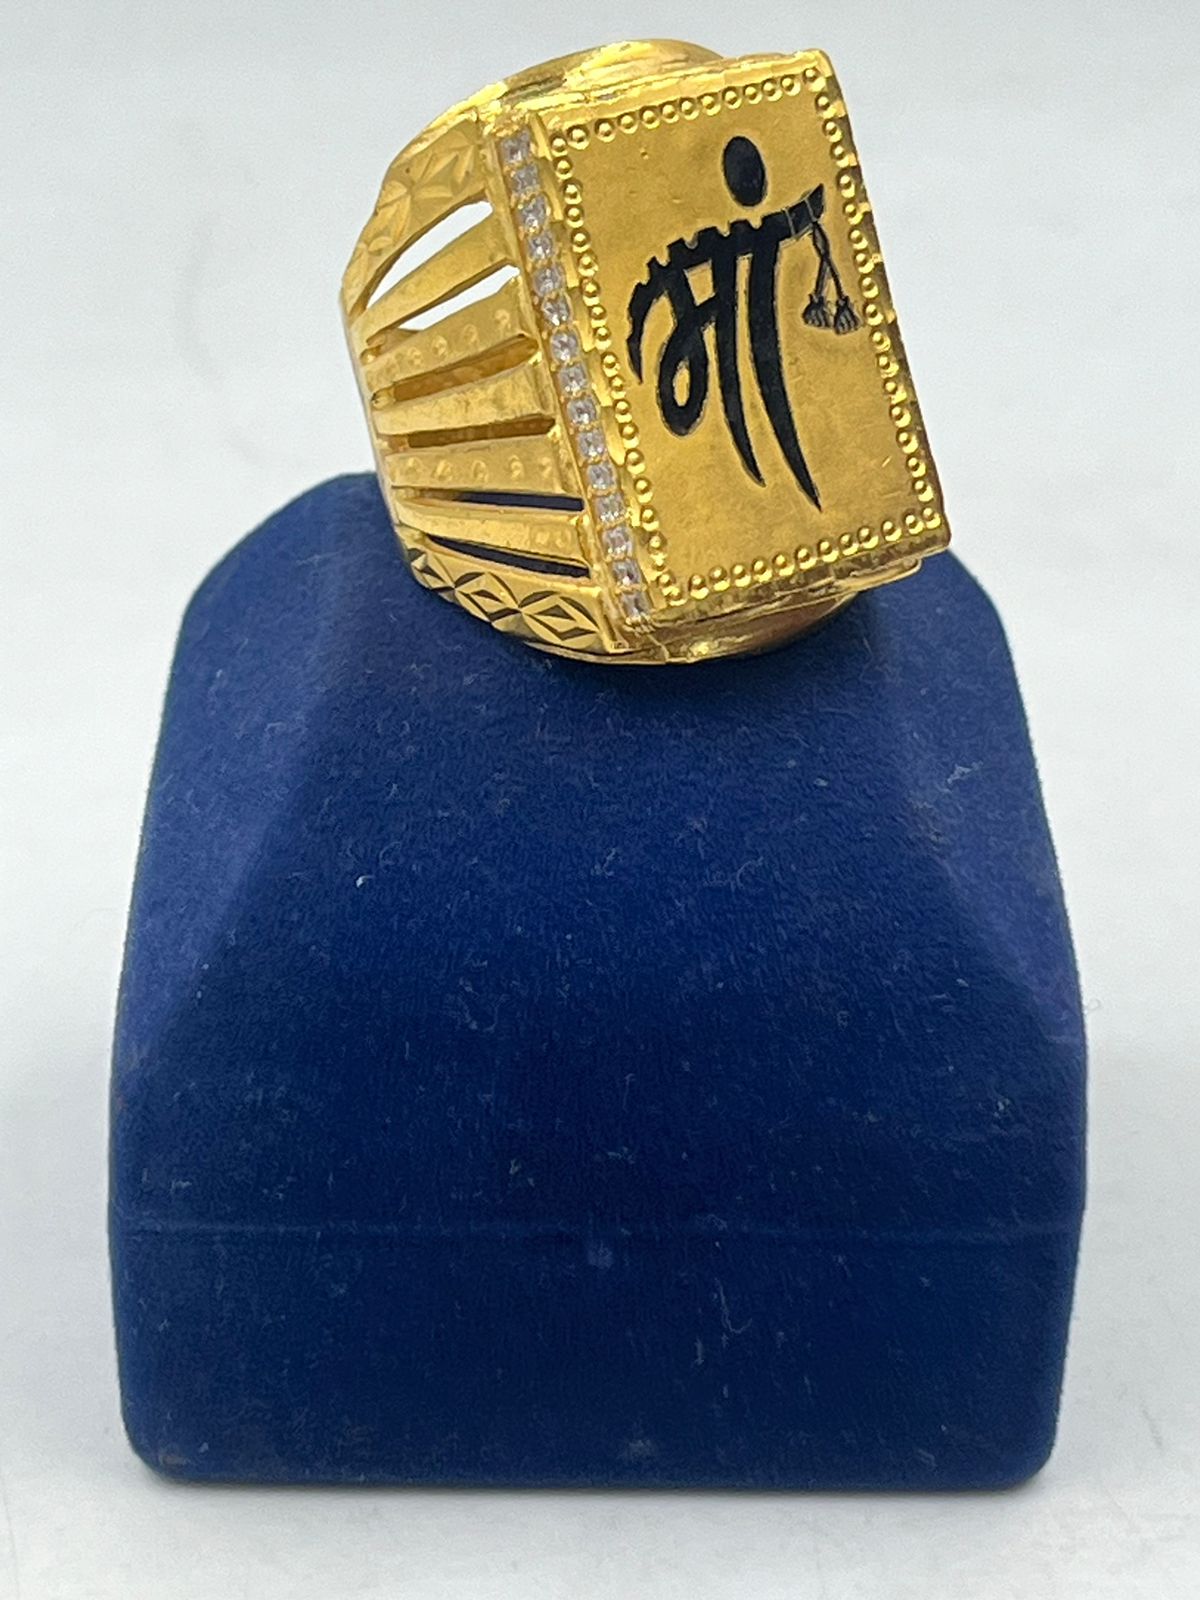 1 Gram Gold Plated Black Stone With Diamond Funky Design Ring For Men -  Style B487 at Rs 2450.00 | Rajkot| ID: 2852585821930